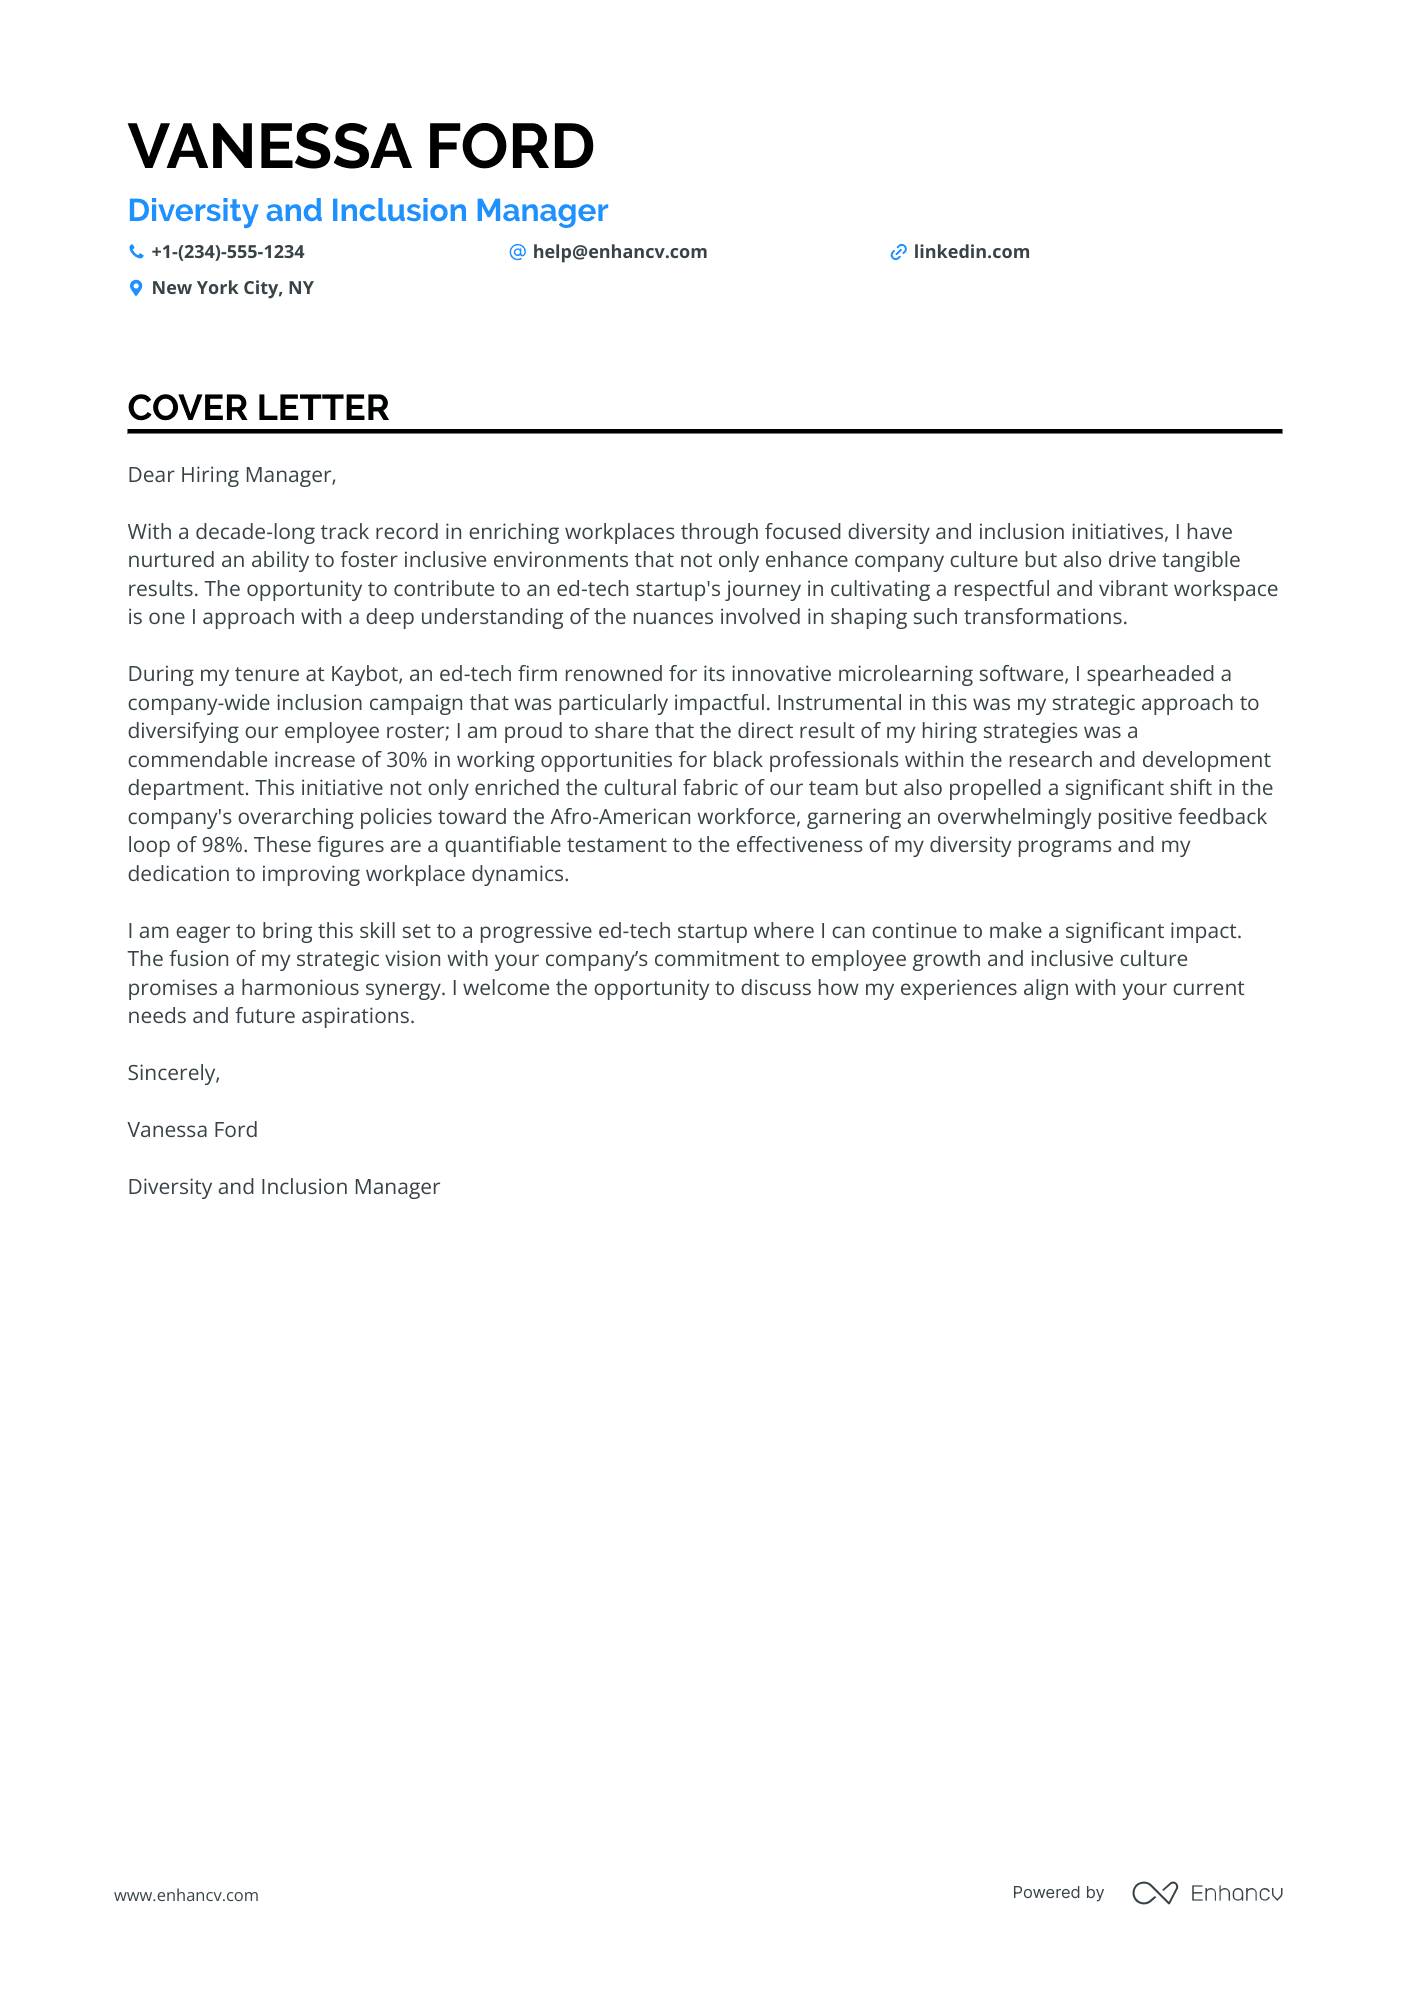 example of a cover letter for hr position